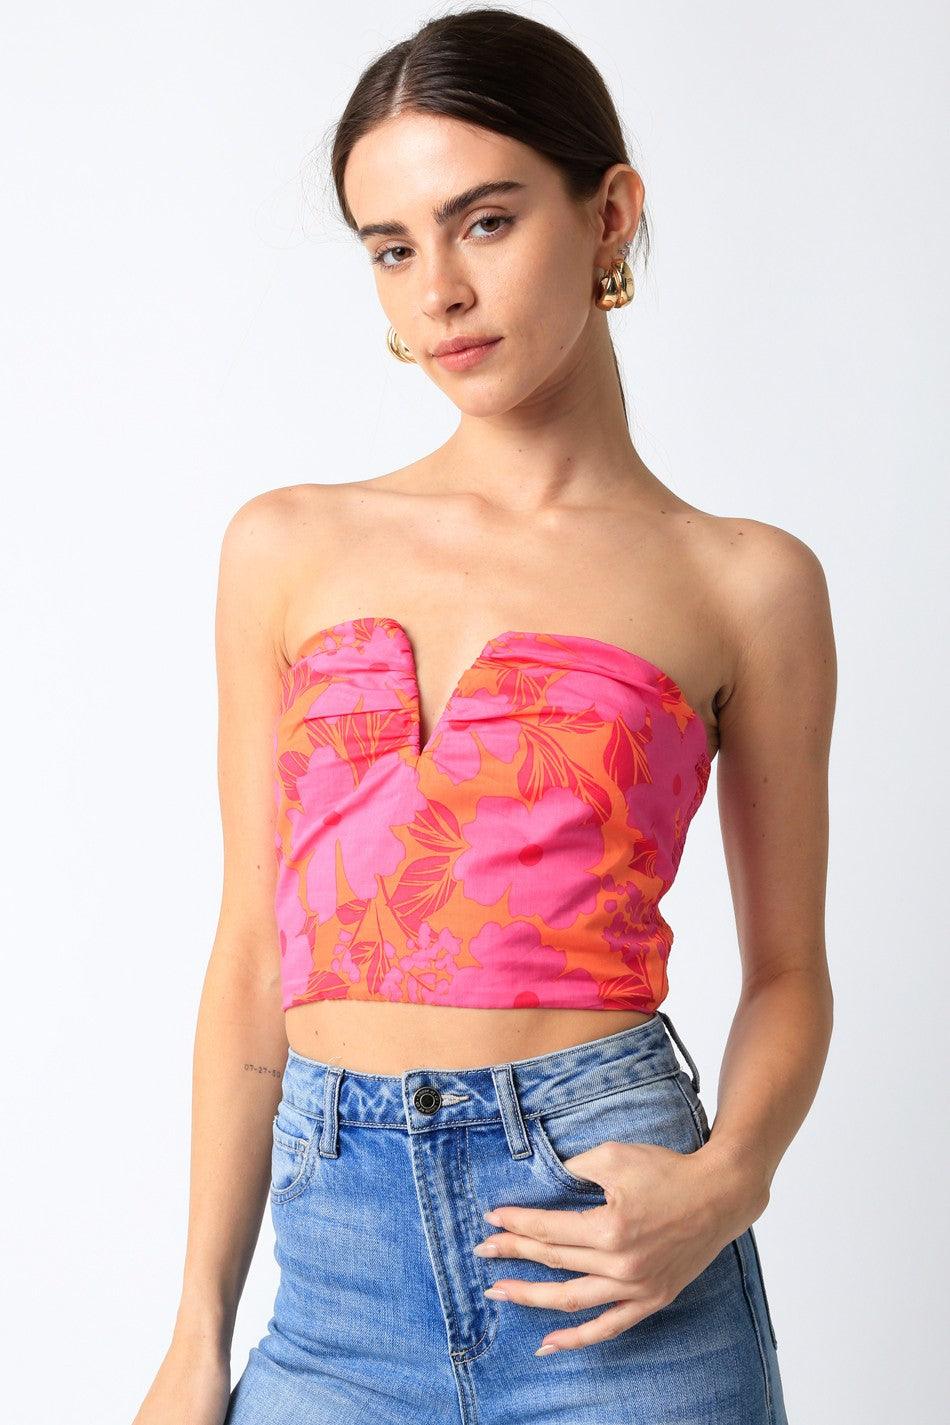 tropical strapless top - RK Collections Boutique